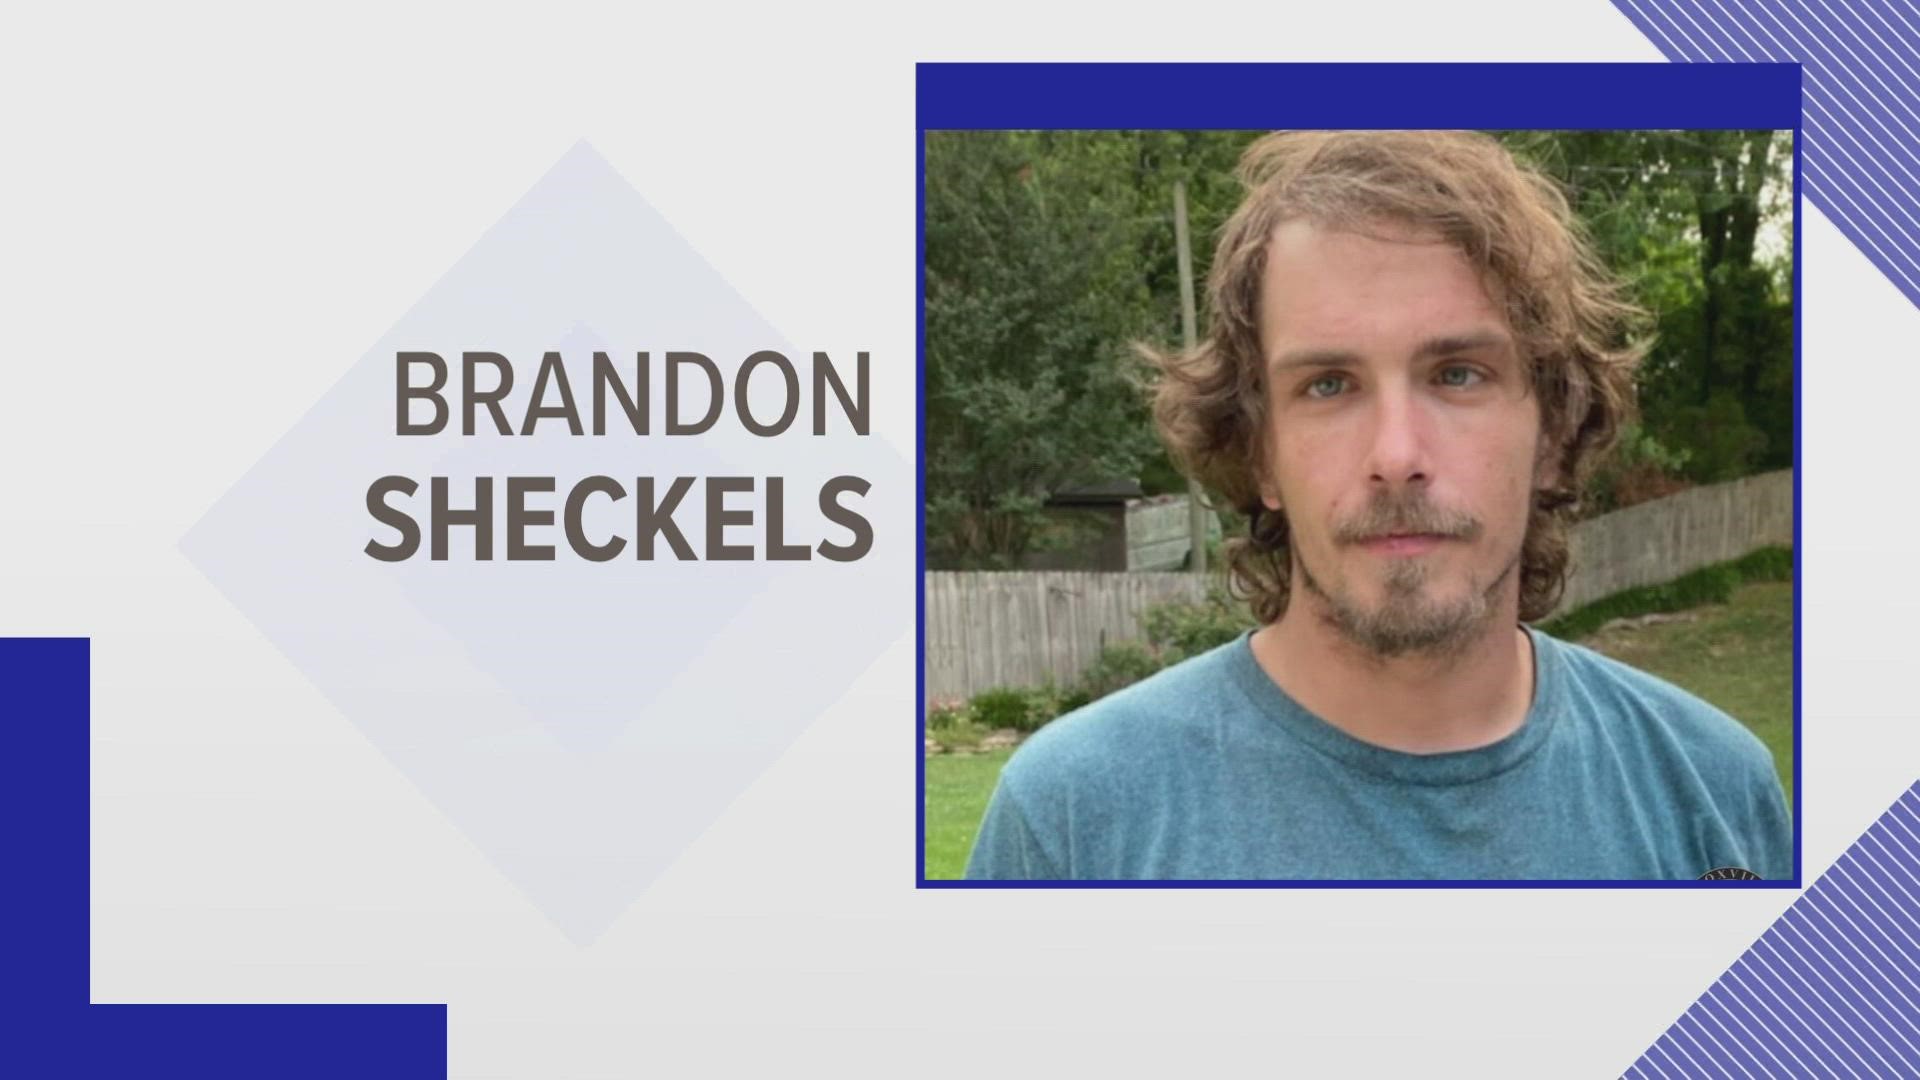 Police said Brandon Sheckels, 35, left his home at around 8 p.m. on Aug.2 on foot and has not been seen since.